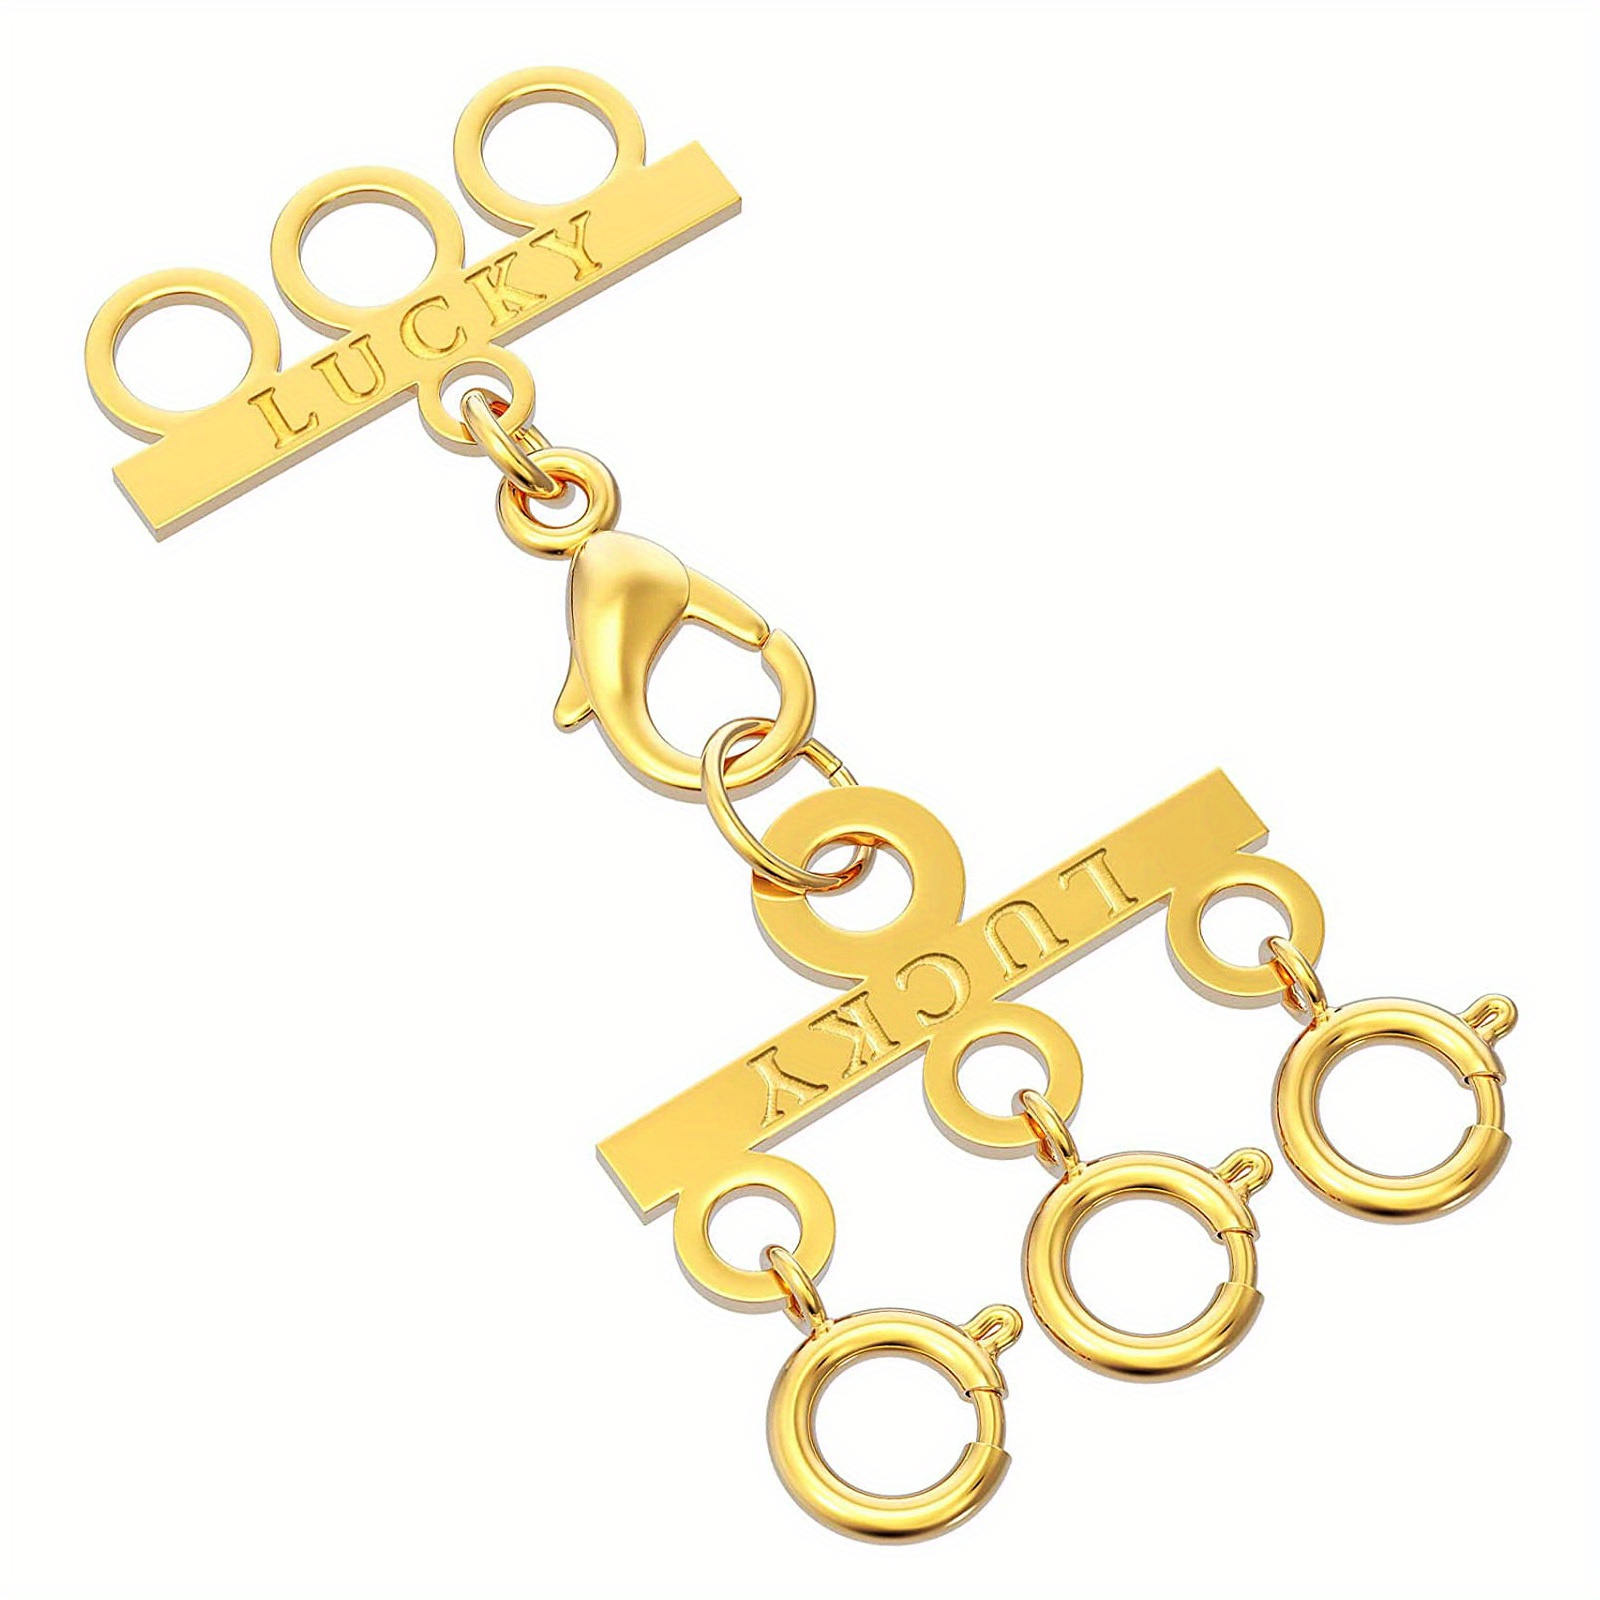 Necklet - Triple Layering Clasp With Security Latch